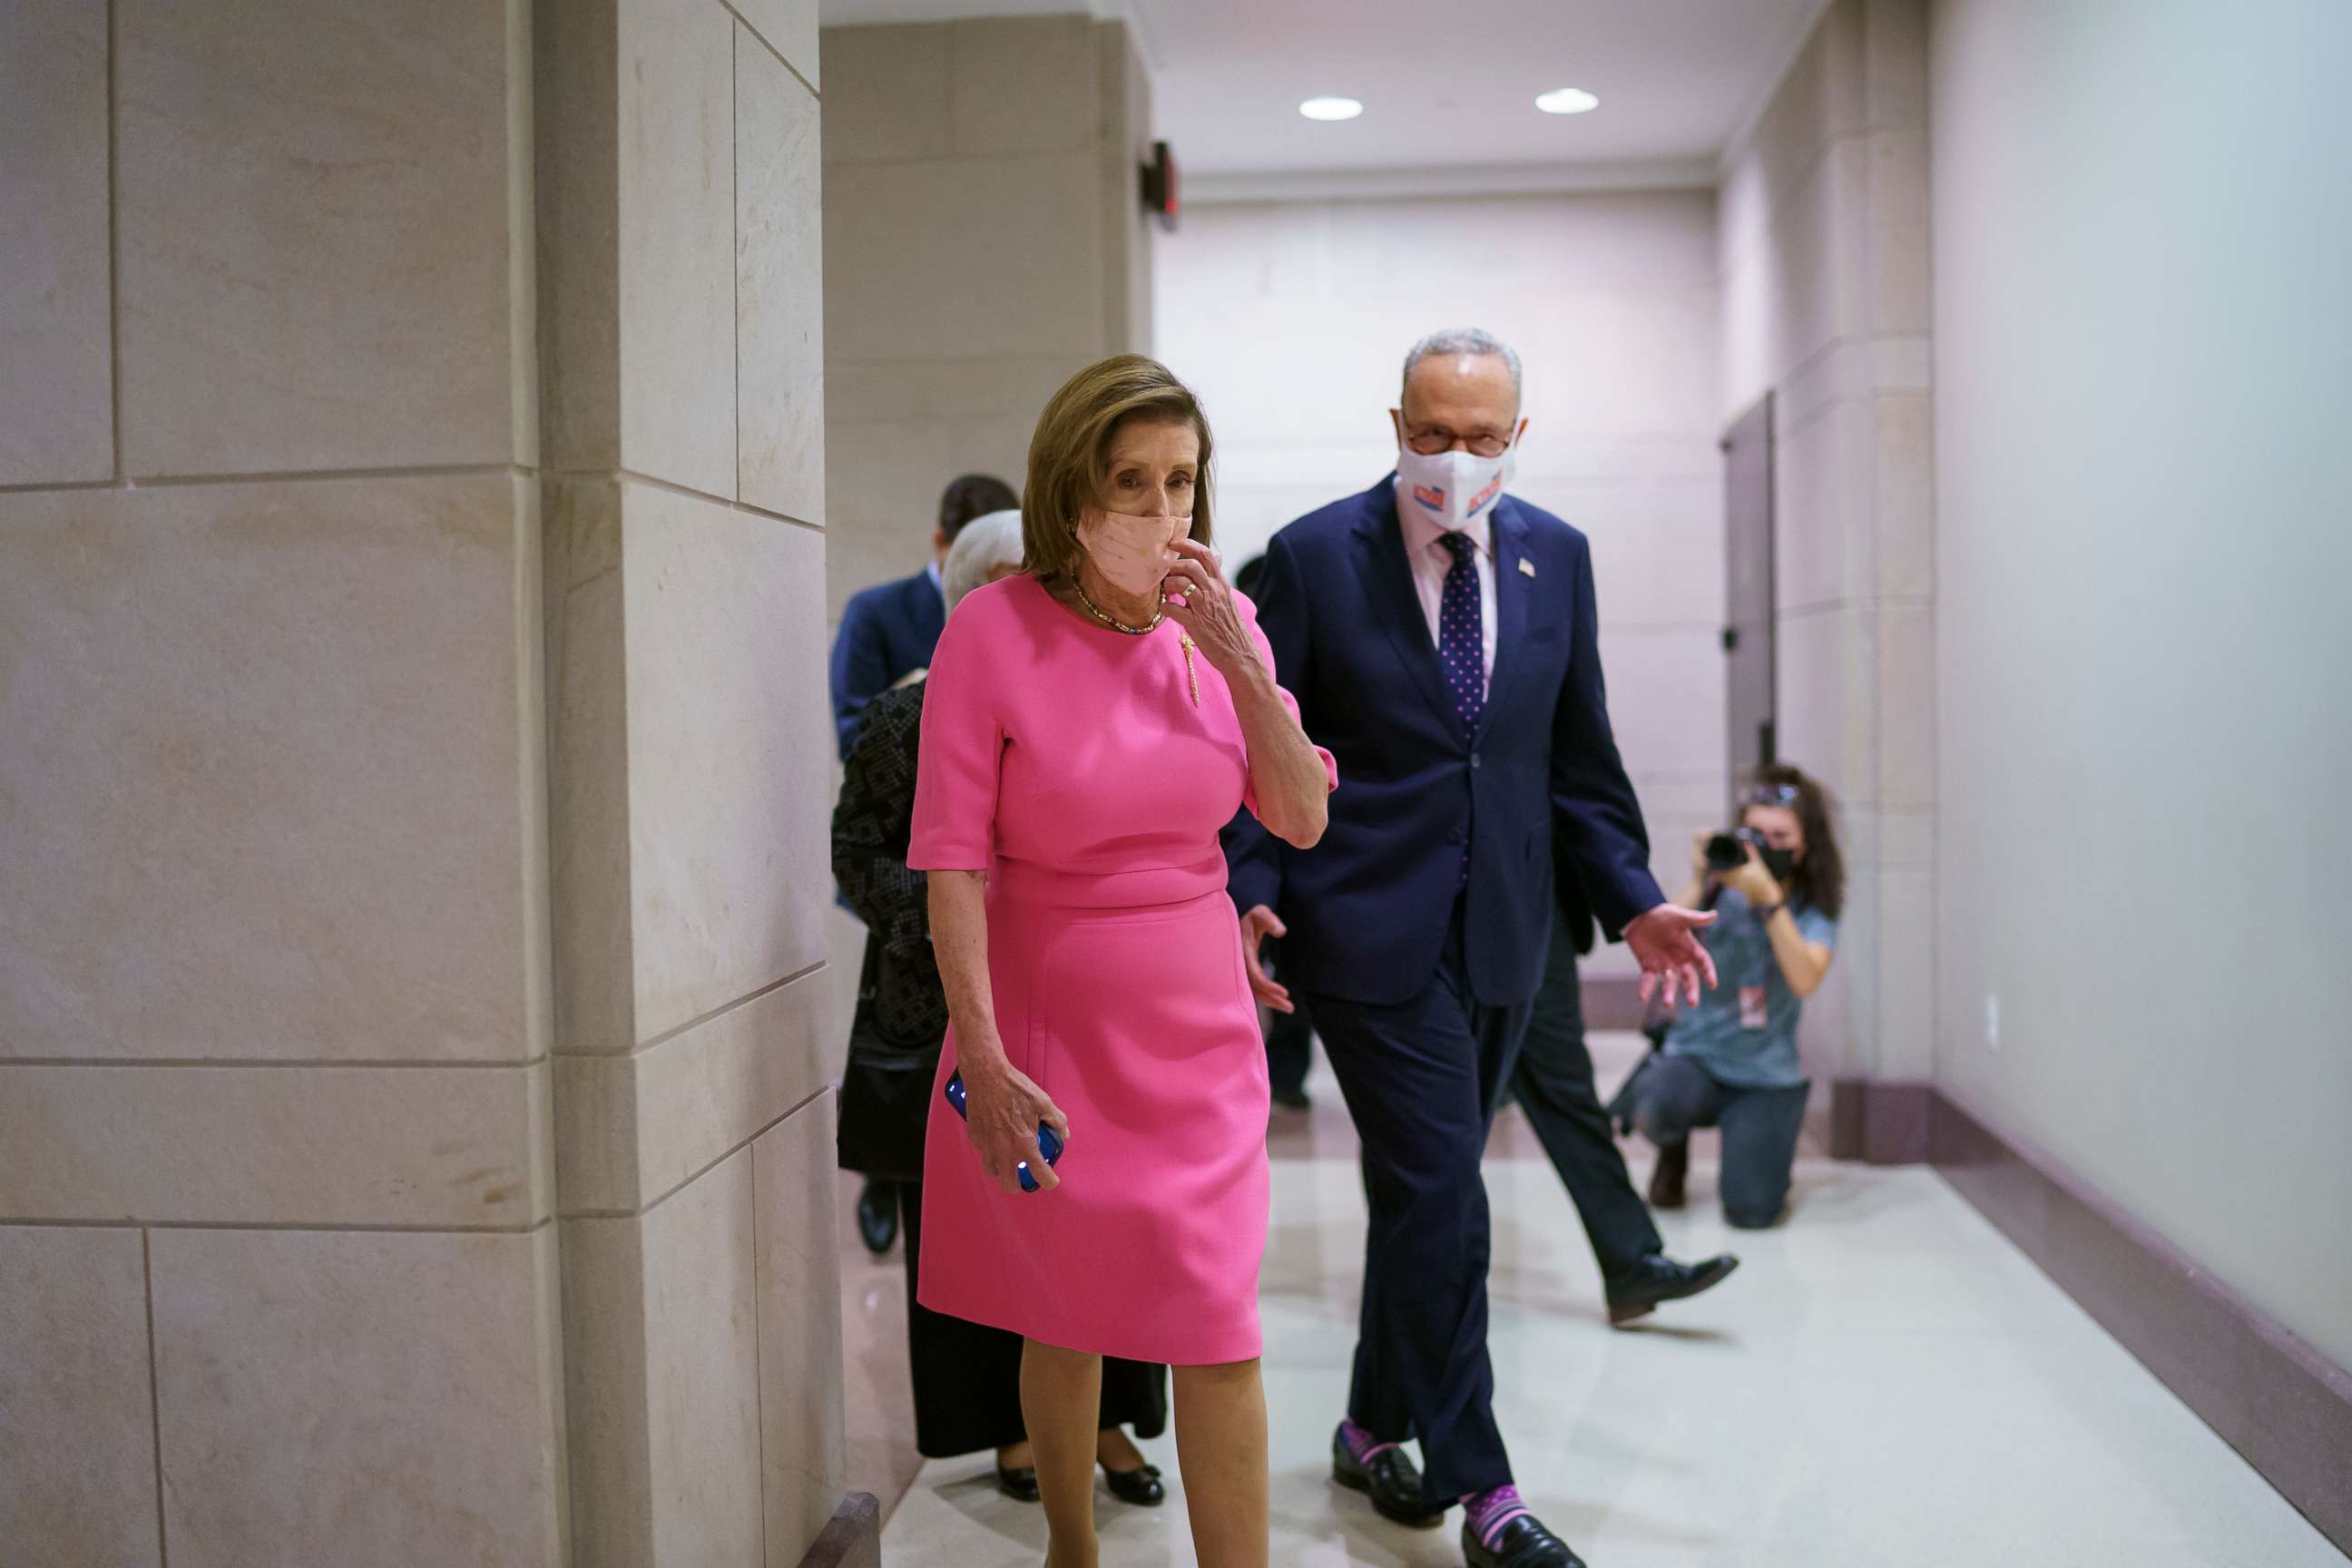 Speaker of the House Nancy Pelosi, D-Calif., and Senate Majority Leader Chuck Schumer, D-N.Y., arrive to update reporters on Democratic efforts to pass President Joe Biden's "Build Back Better" agenda at the Capitol in Washington on Sept. 23, 2021. 